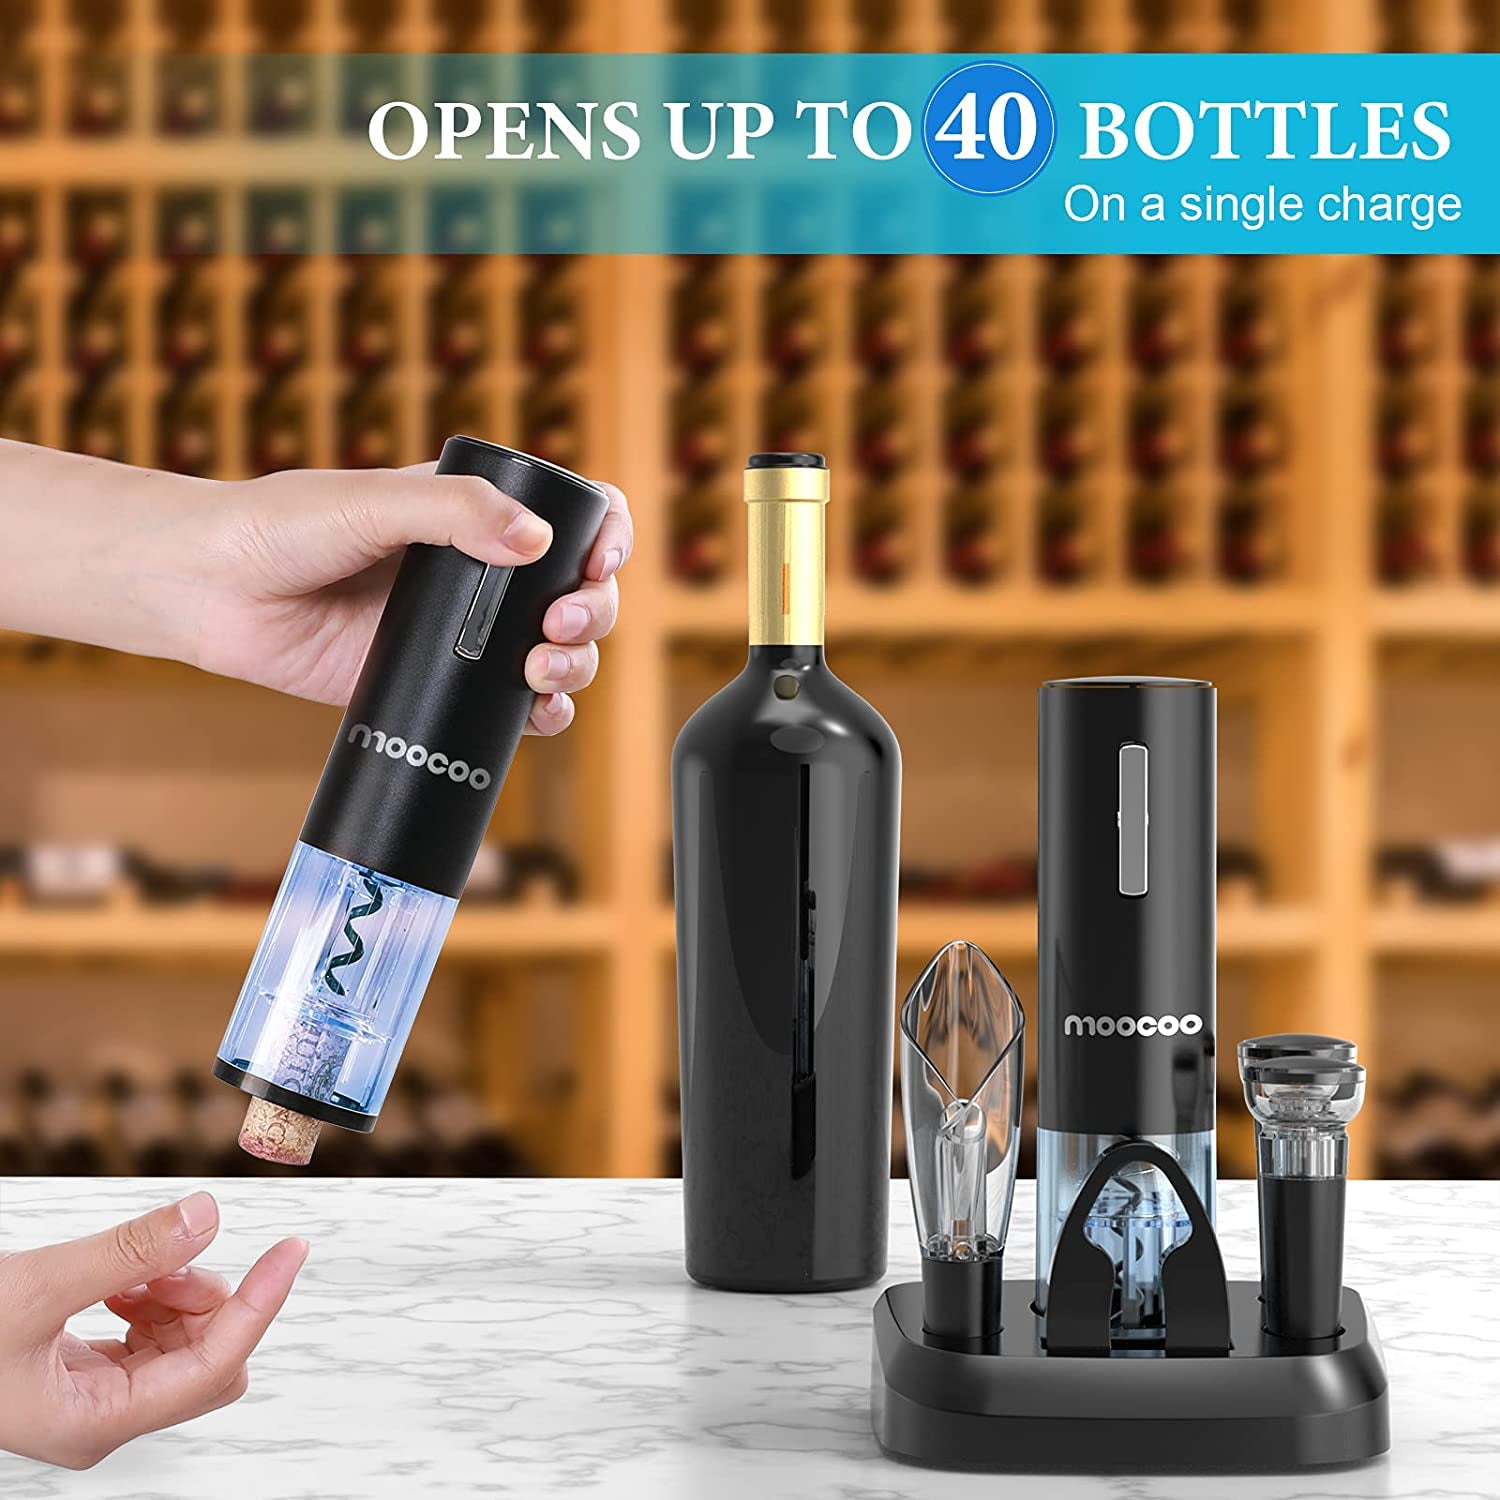 Electric Wine Opener with Charging Base,  Cordless Electric Wine Bottle Opener with 2-In-1 Aerator &Pourer, Foil Cutter, 2 Vacuum Preservation Stoppers, Display Charging Station for Easy Storage